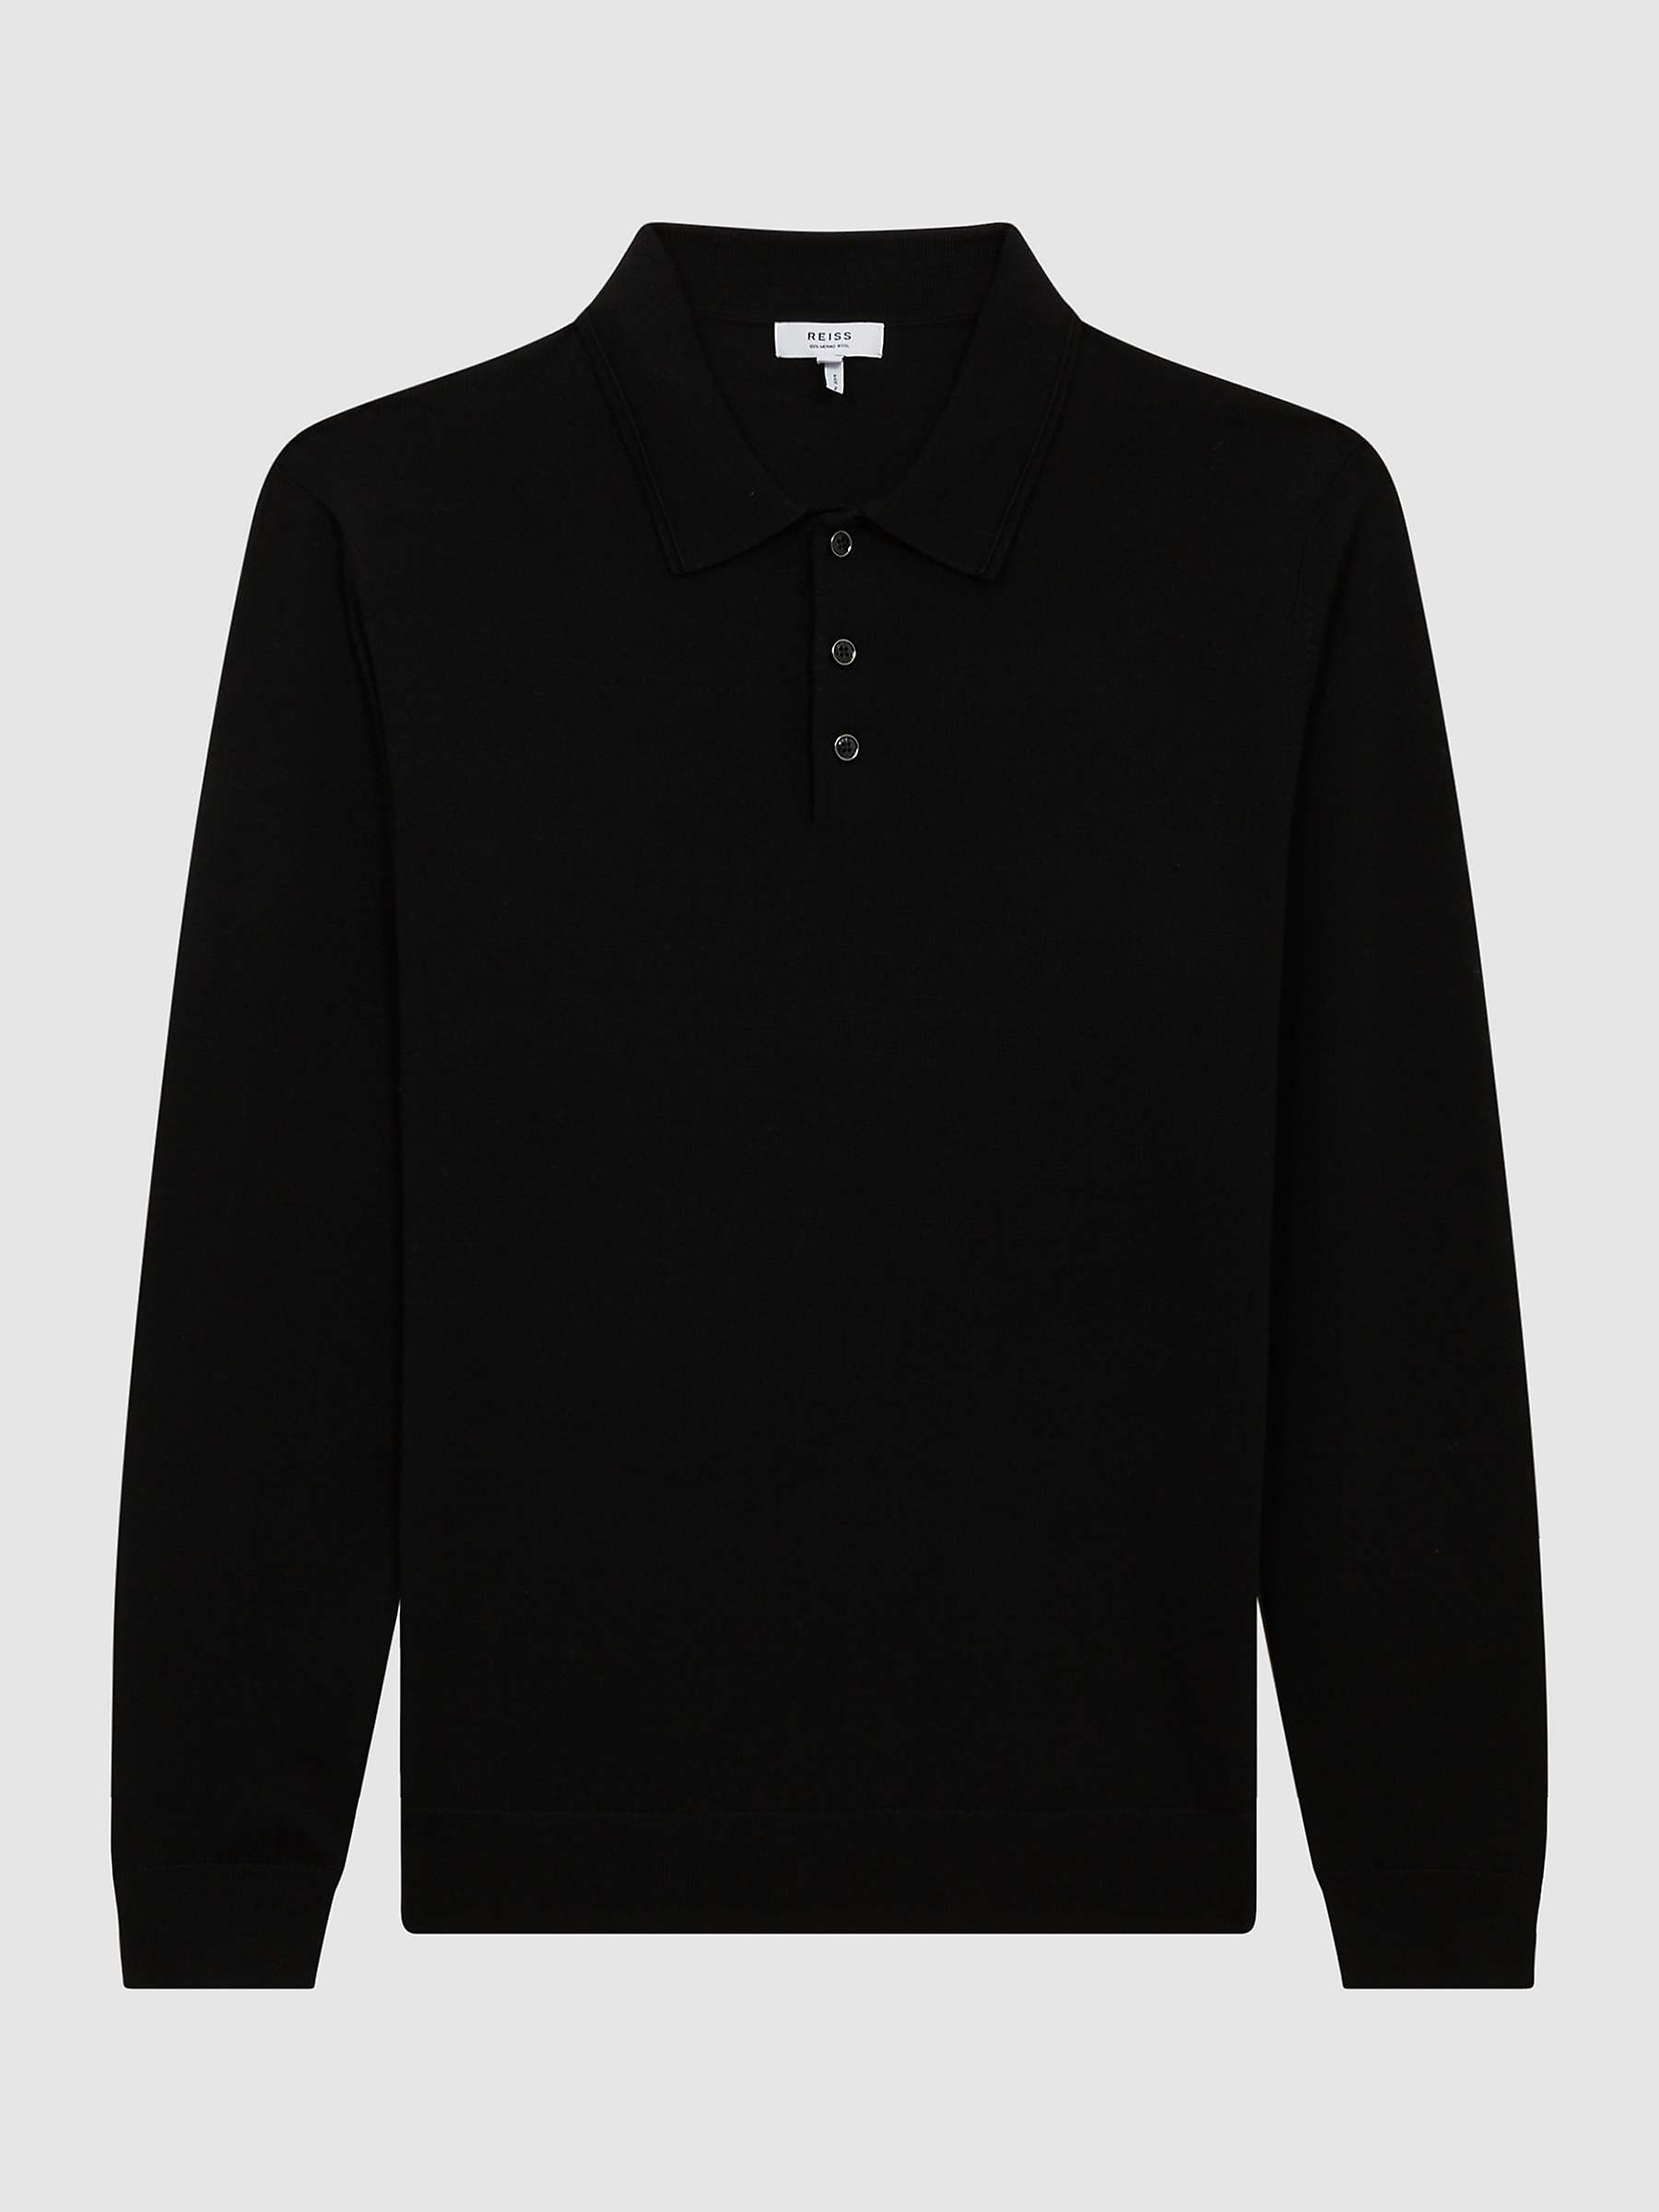 Reiss Trafford Knitted Wool Long Sleeve Polo Top, Black at John Lewis ...